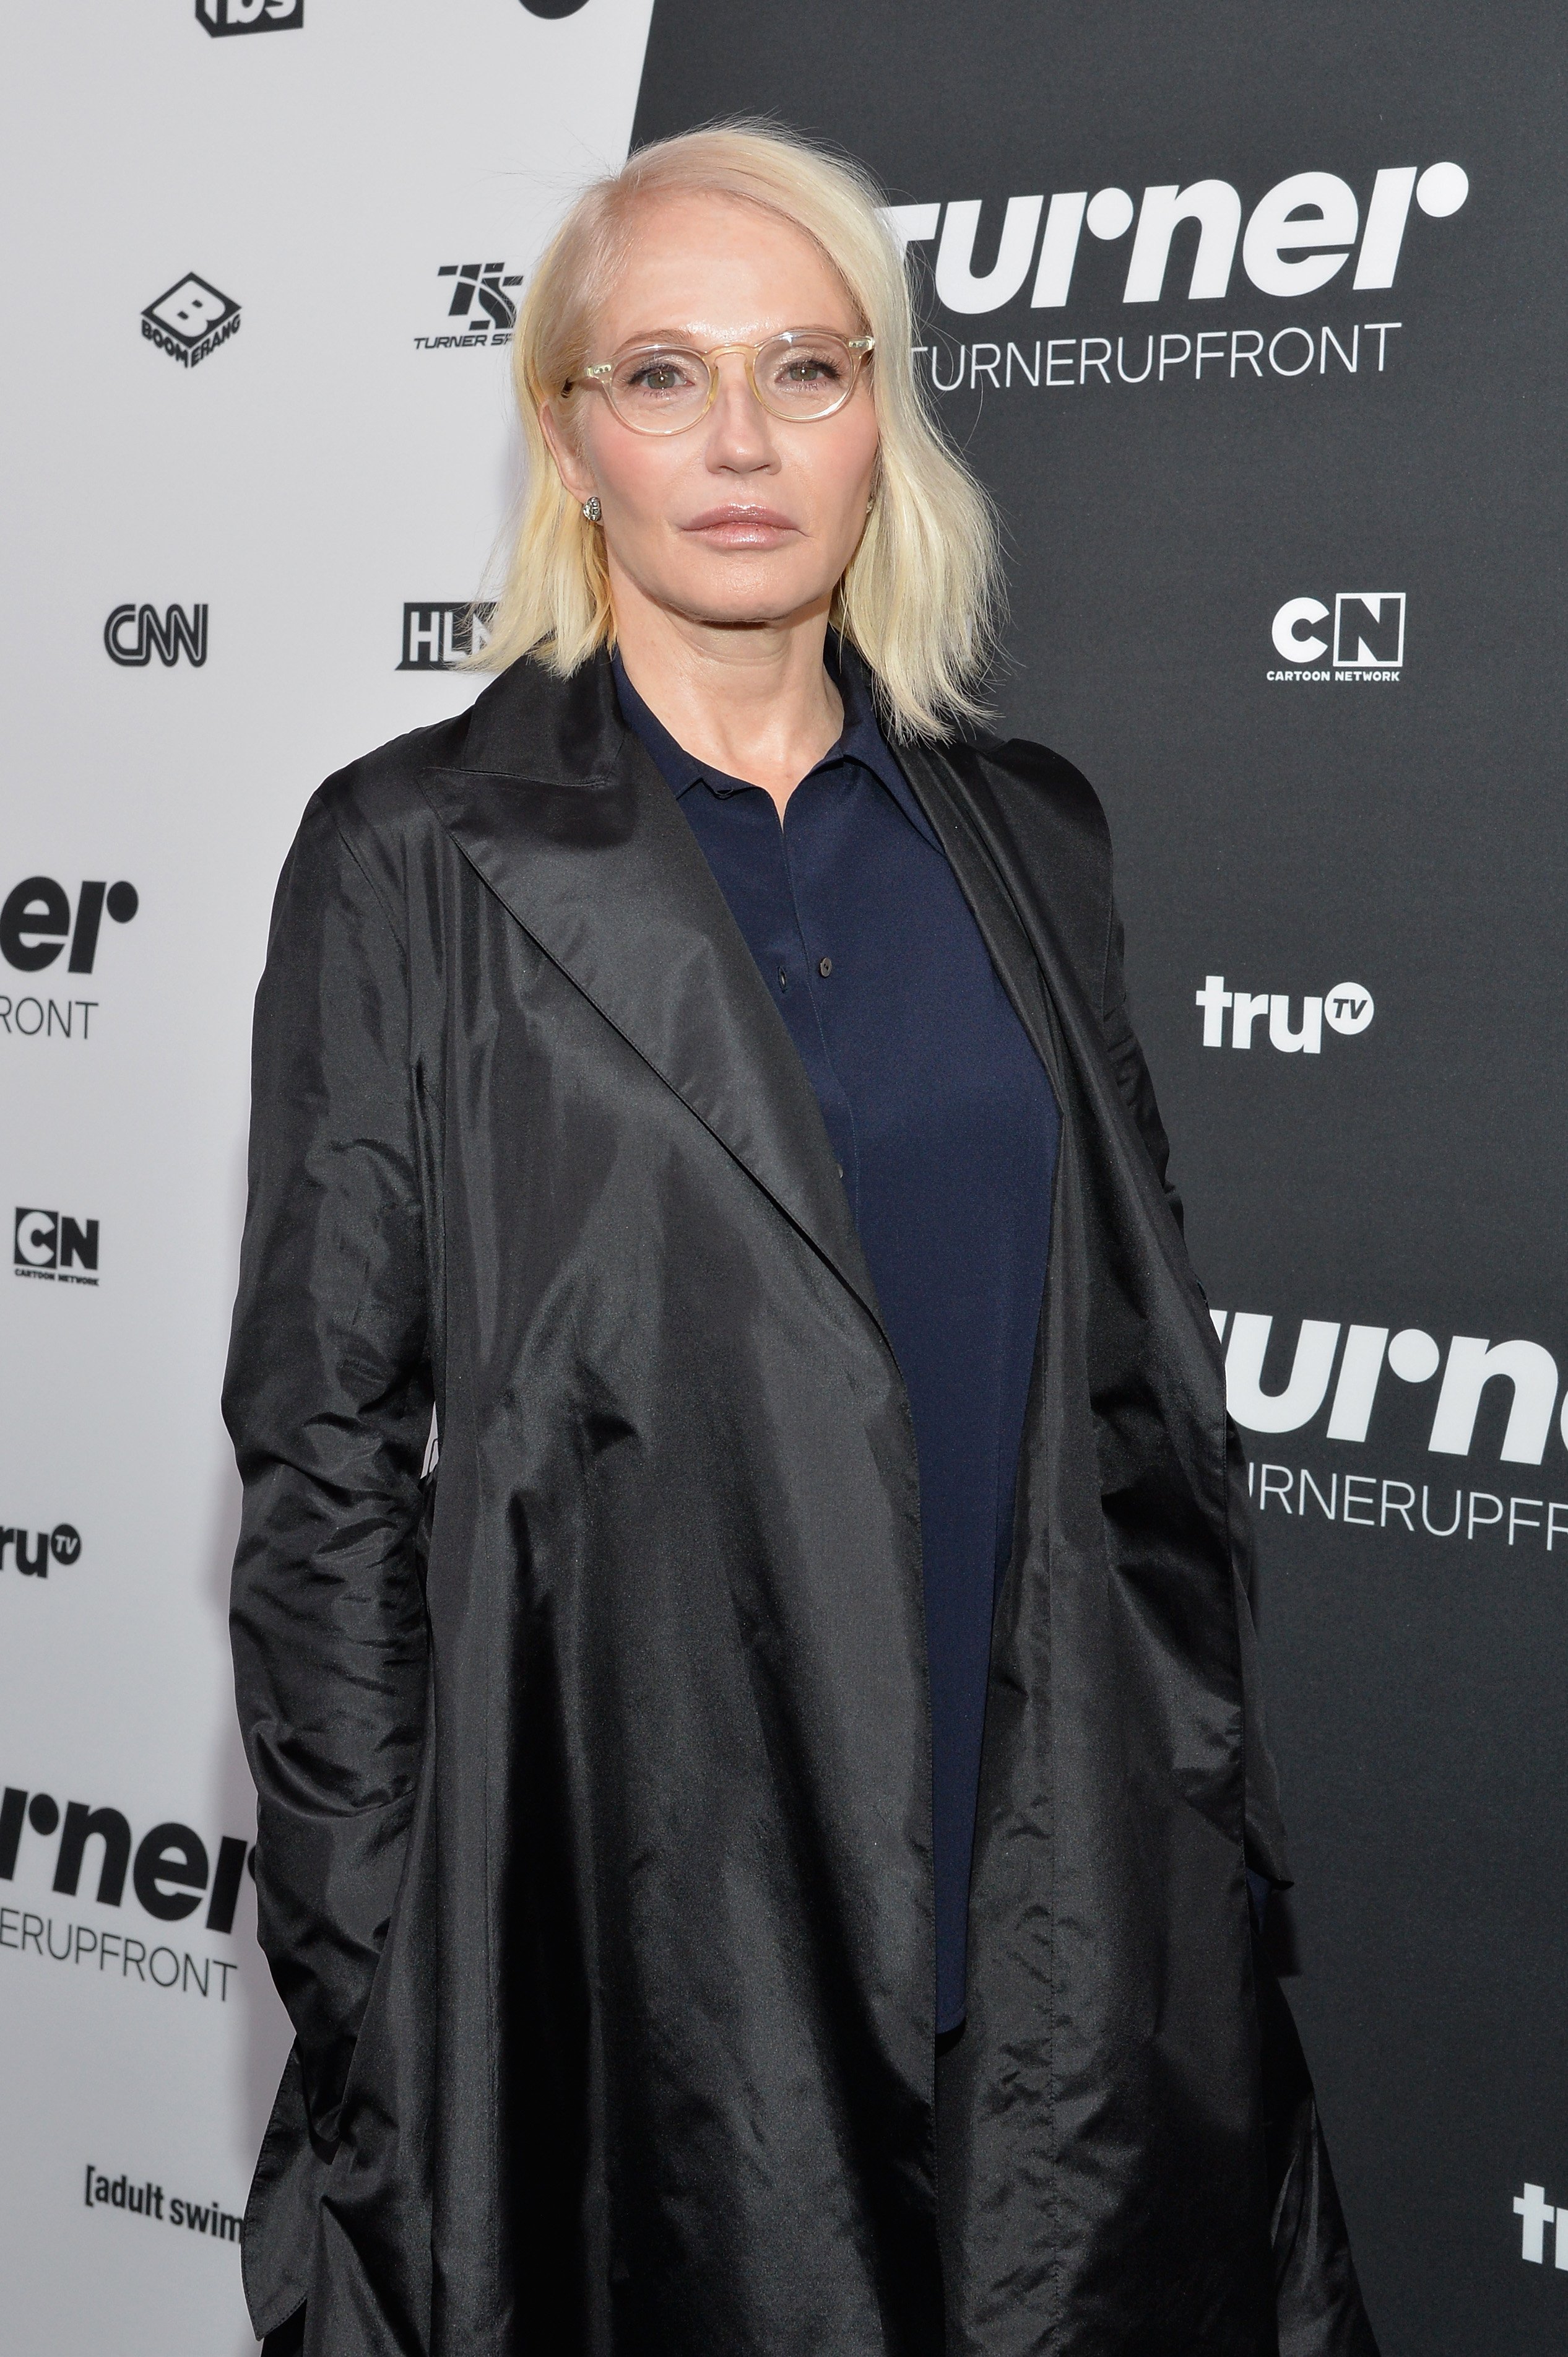 Ellen Barkin attends the Turner Upfront 2016 at Nick & Stef's Steakhouse on May 18, 2016, in New York City. | Source: Getty Images